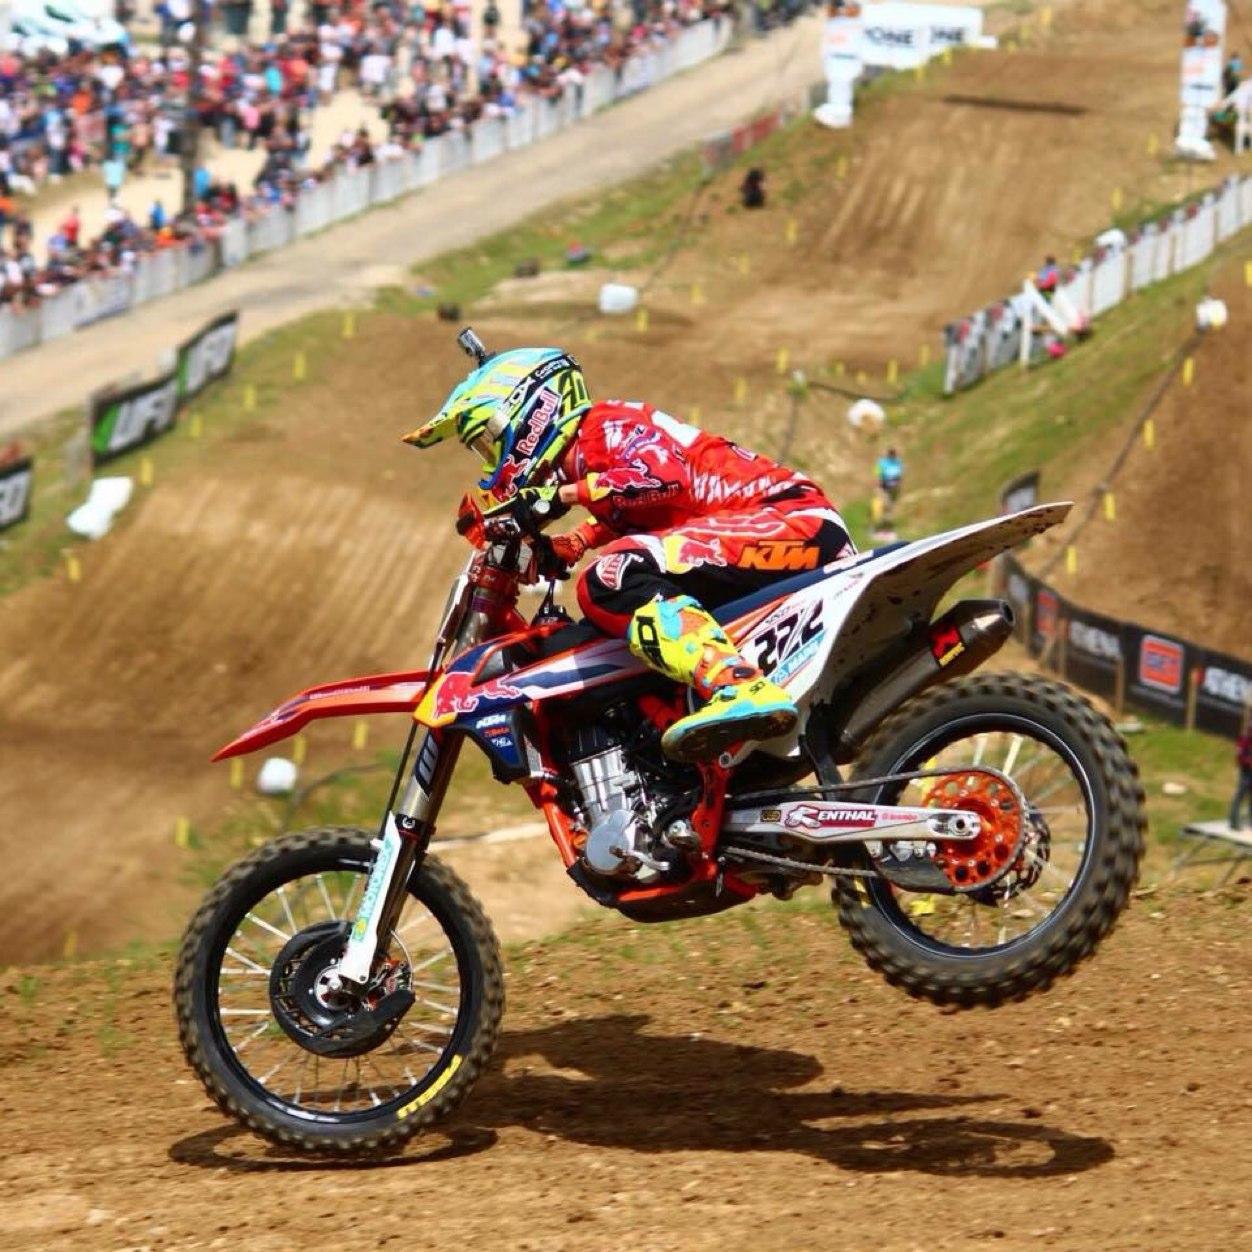 Fanpage; For all news about 8 times Motocross Worldchampion Tony Cairoli